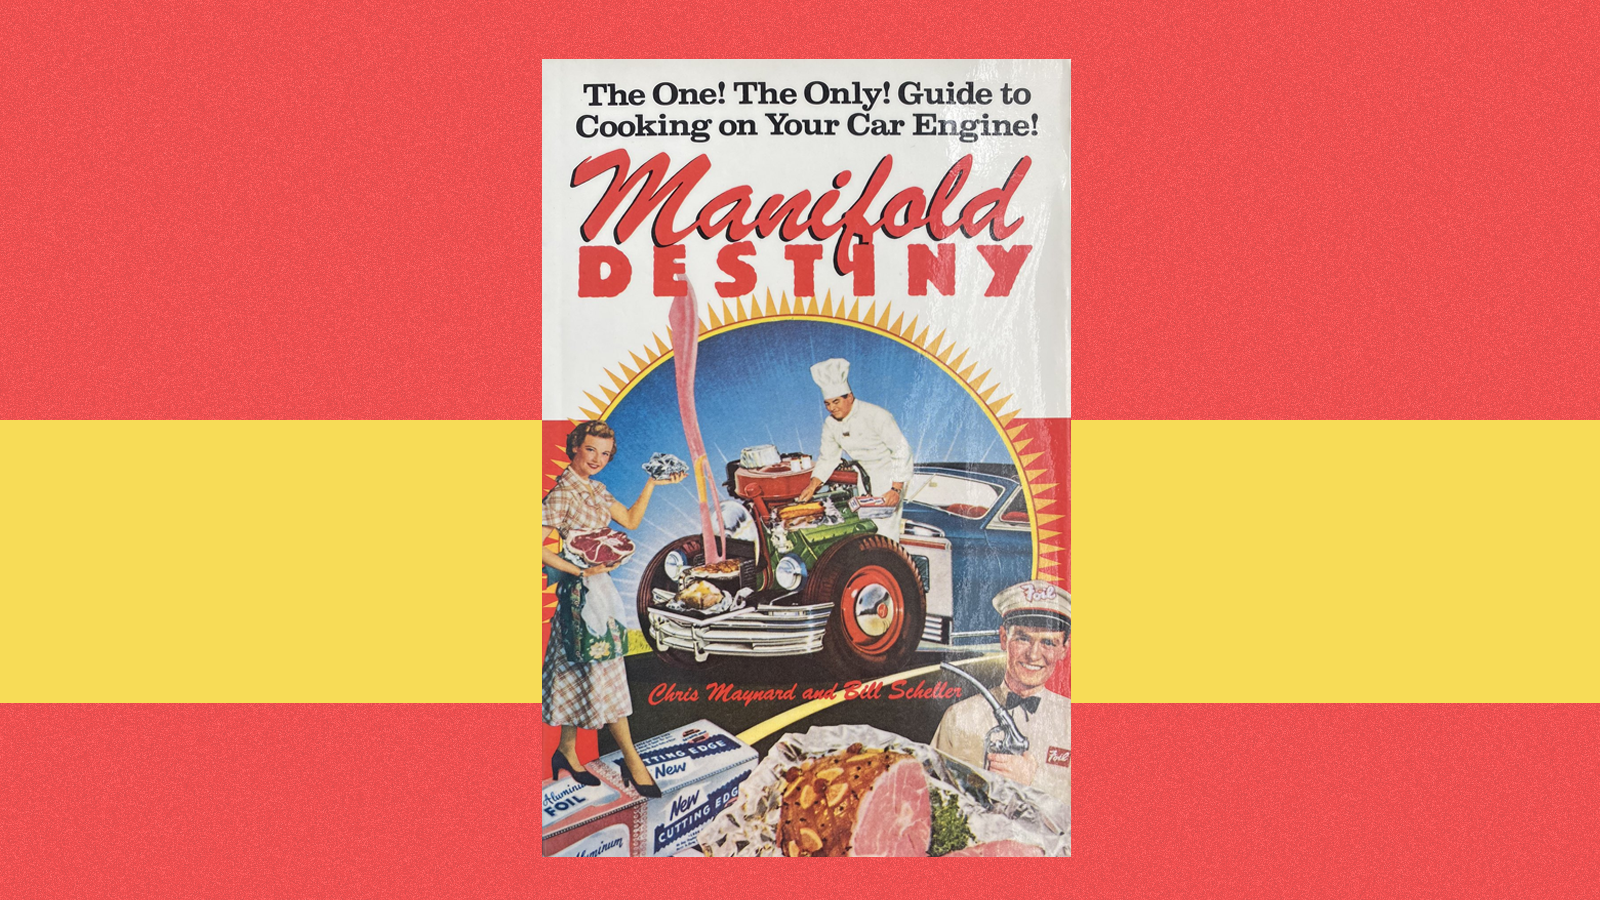 The cover of the book “Manifold Destiny,” superimposed over a yellow and red backdrop. Photo illustration.